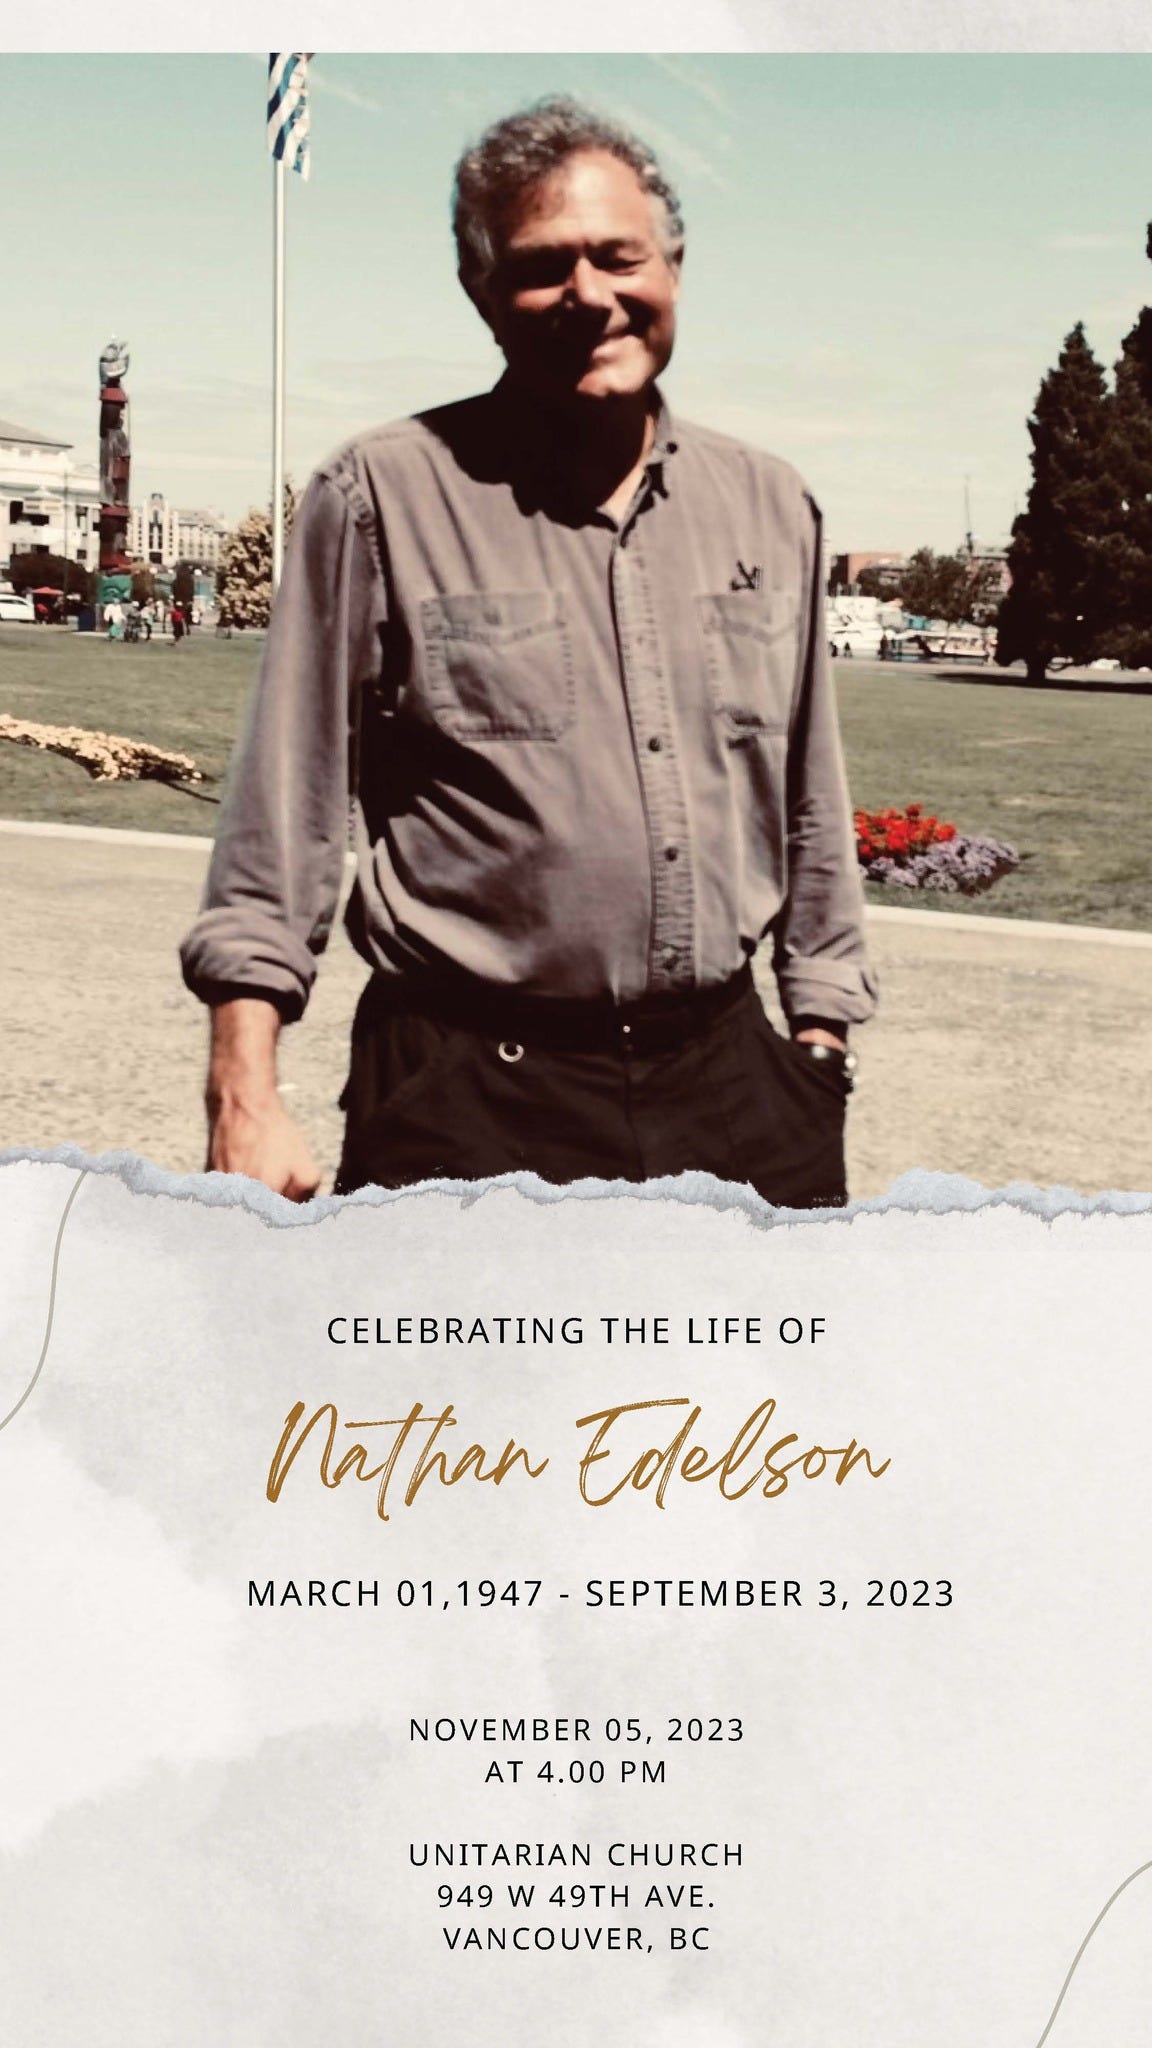 May be an image of 1 person and text that says 'CELEBRATING THE LIFE OF Nathan Edelson MARCH 01,1947 SEPTEMBER 2023 NOVEMBER 05, 2023 AT 4.00 PM UNITARIAN CHURCH 949 49TH AVE. VANCOUVER, Bc'